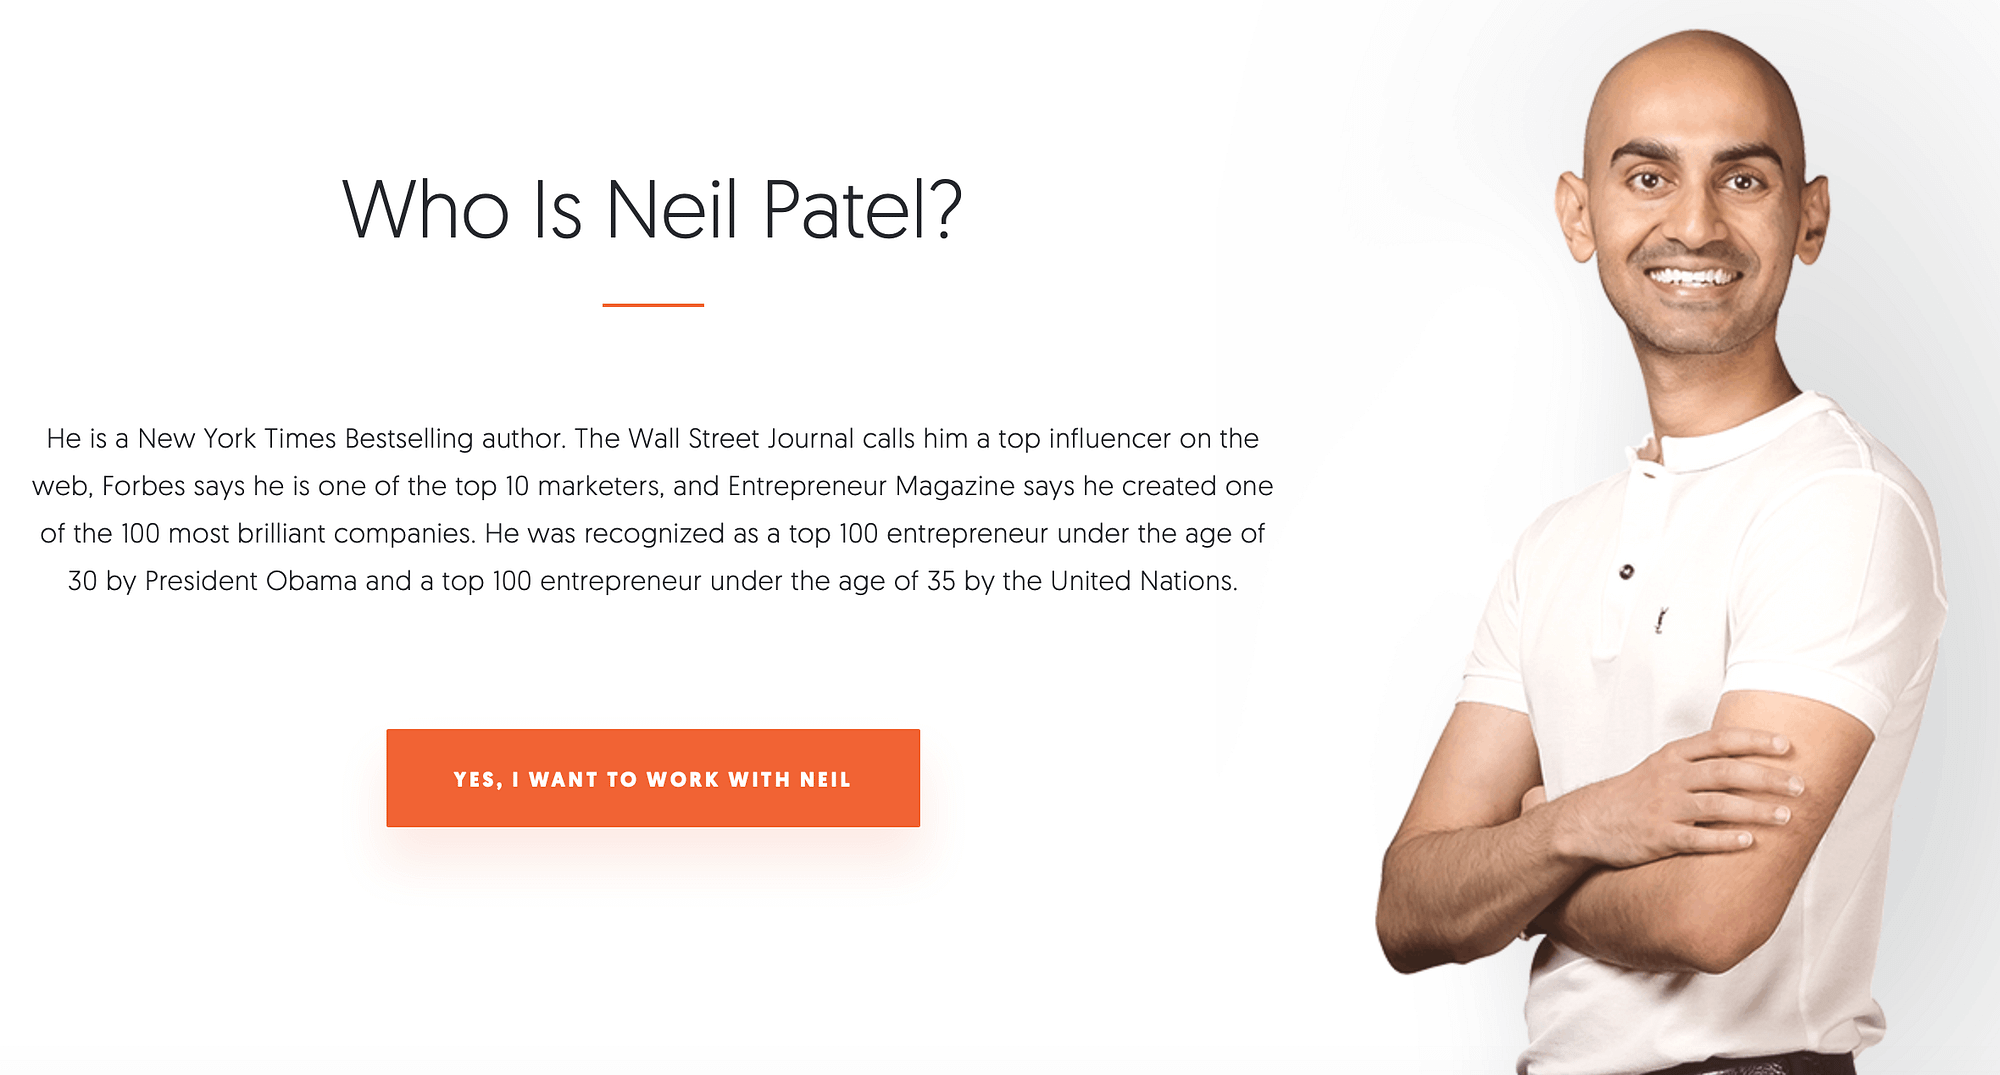 An image of Neil Patel from his home page.